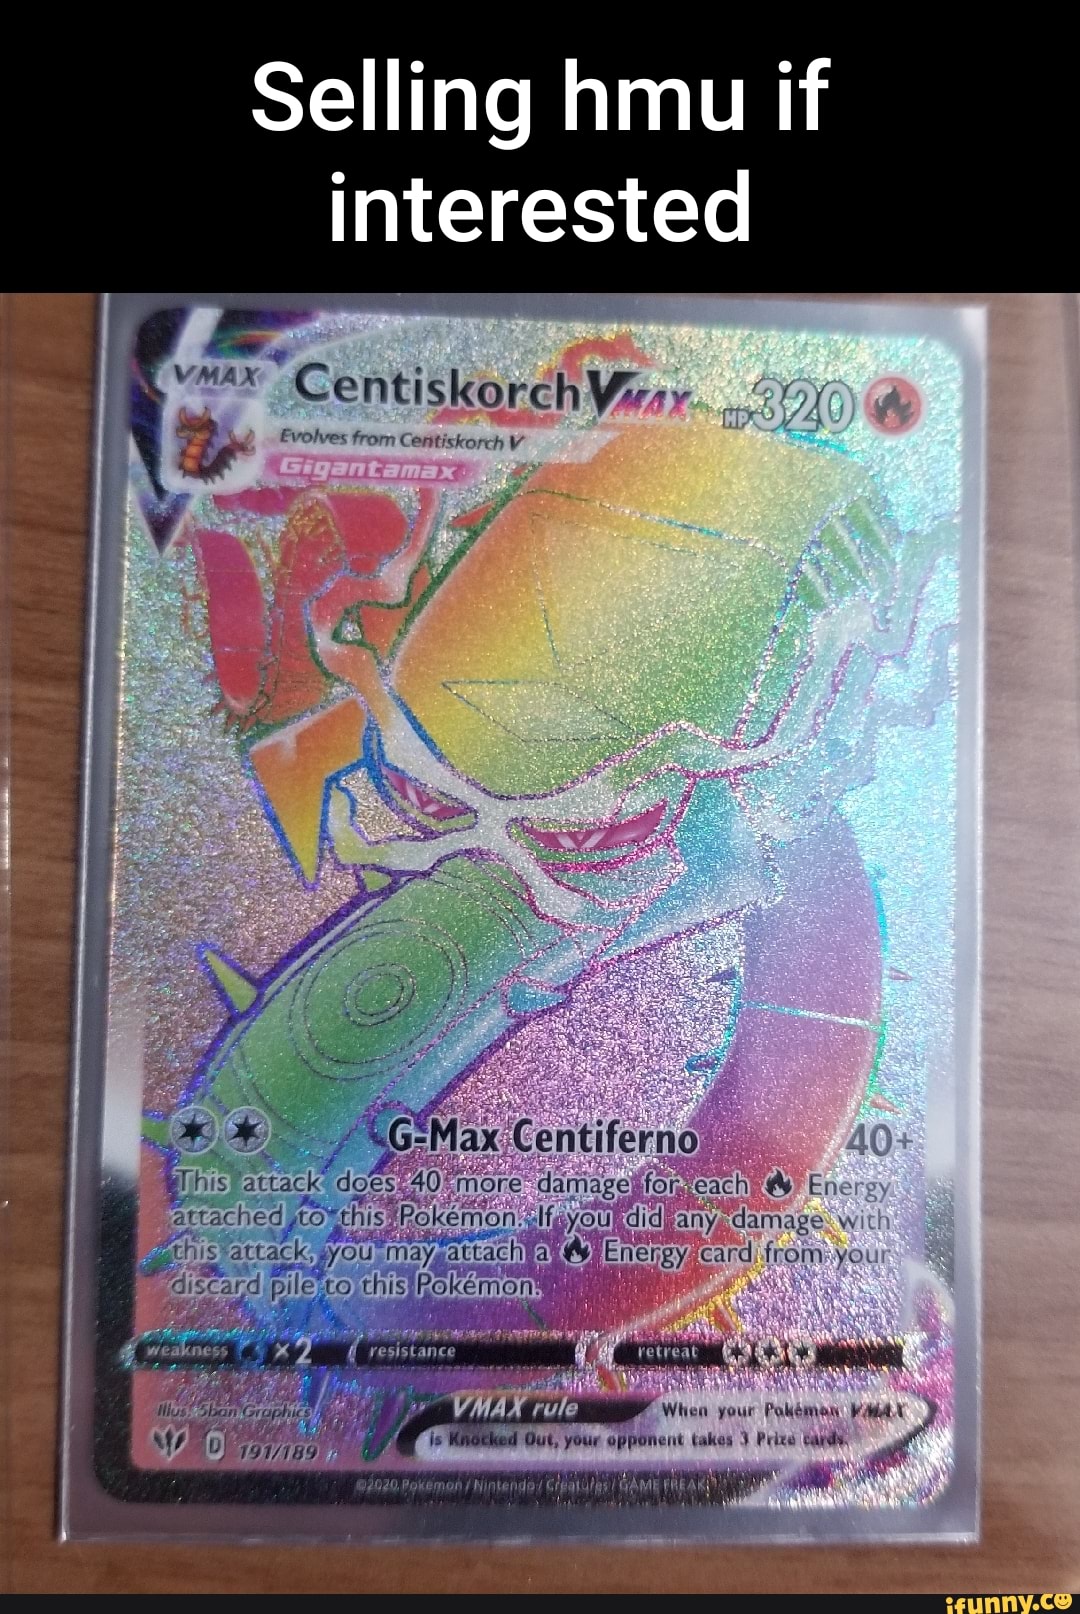 Selling Hmu If Interested Vaiax Centiskorch Wirry Evolves From Ceritiskorch V This This Vesistan Ached His